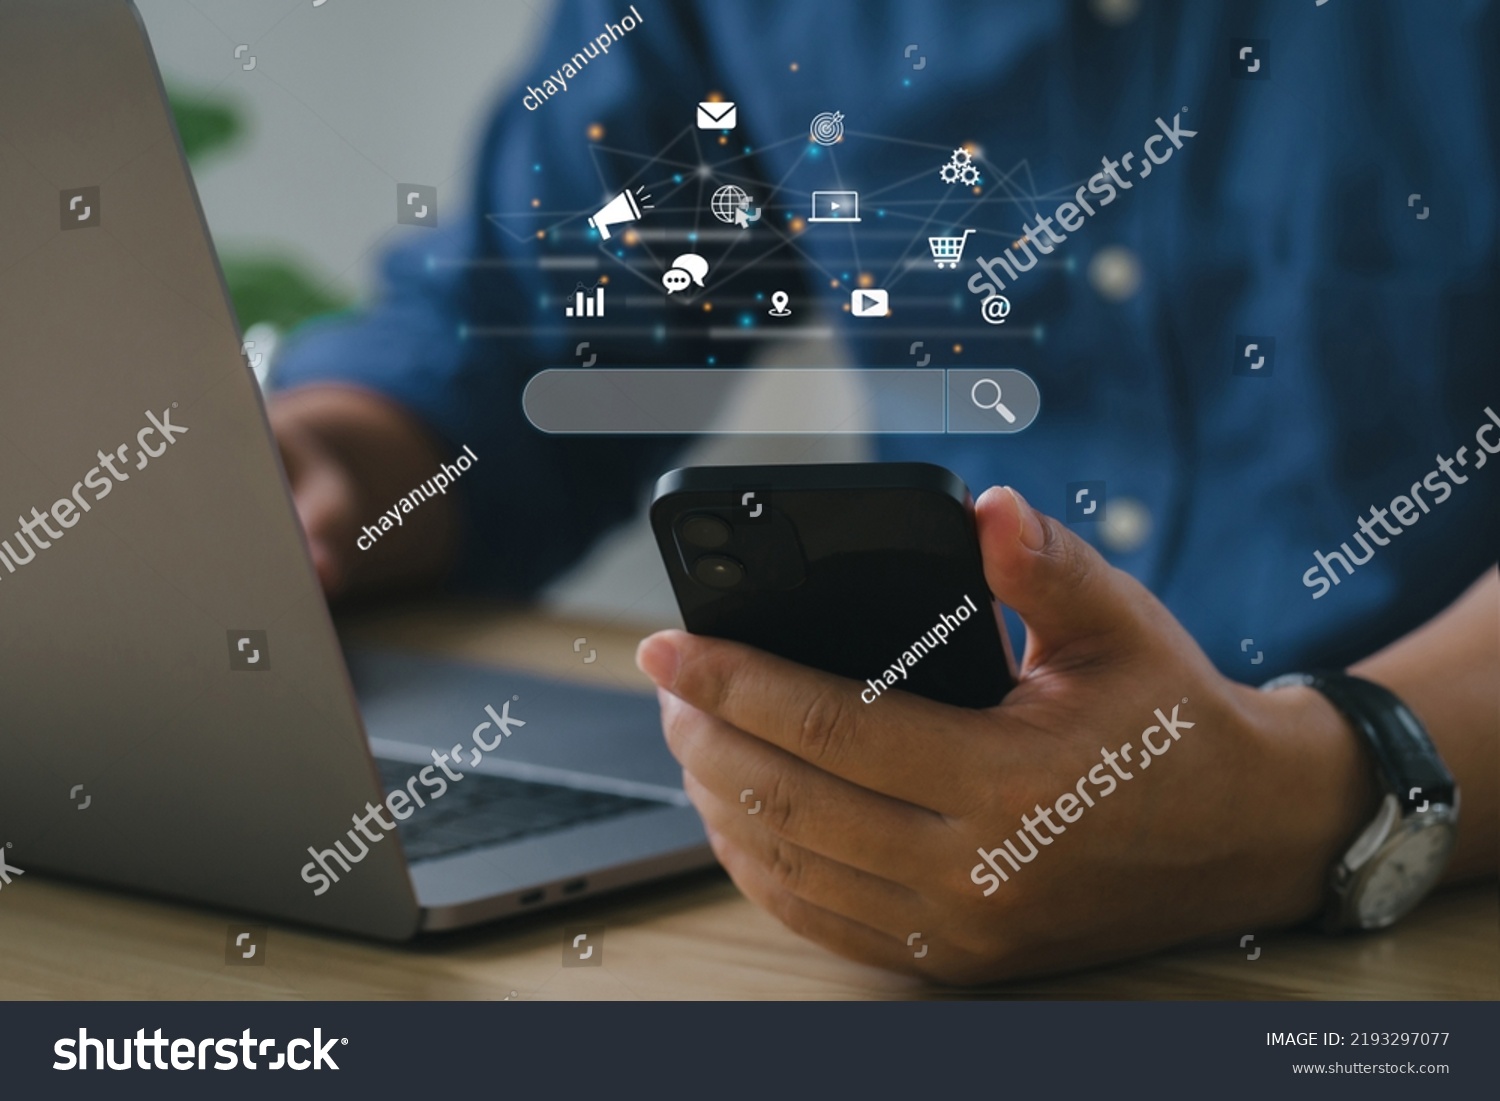 SEO Concept. Businessmen use smartphones with laptops. SEO icon for analysis SEO Search Engine optimizing your website to rank in search engines or SEO. best promoting ranking traffic on your website. #2193297077